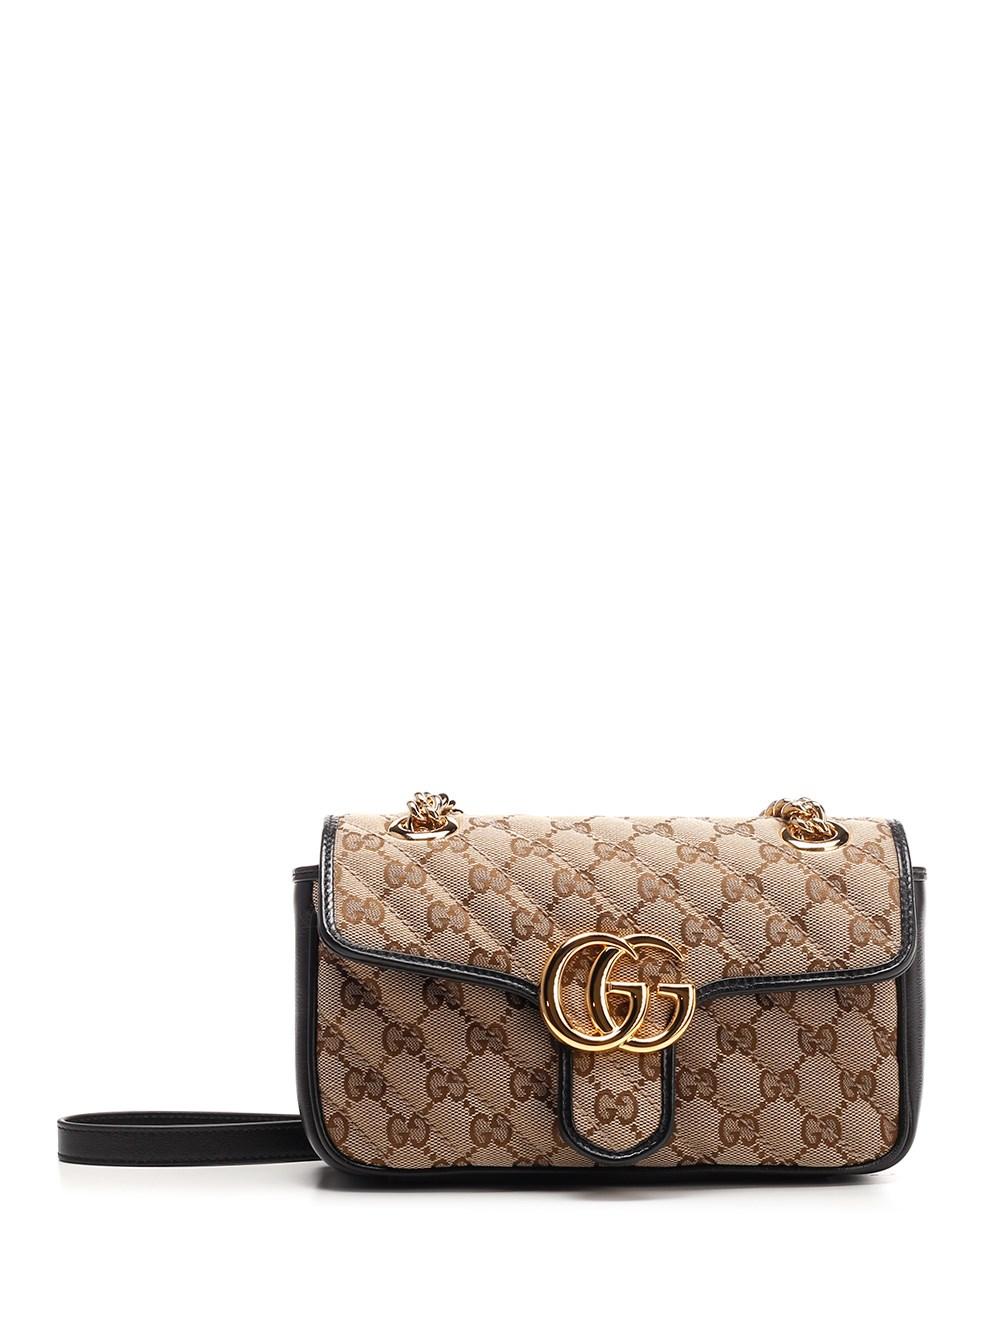 GG Marmont Small Shoulder Bag in Black